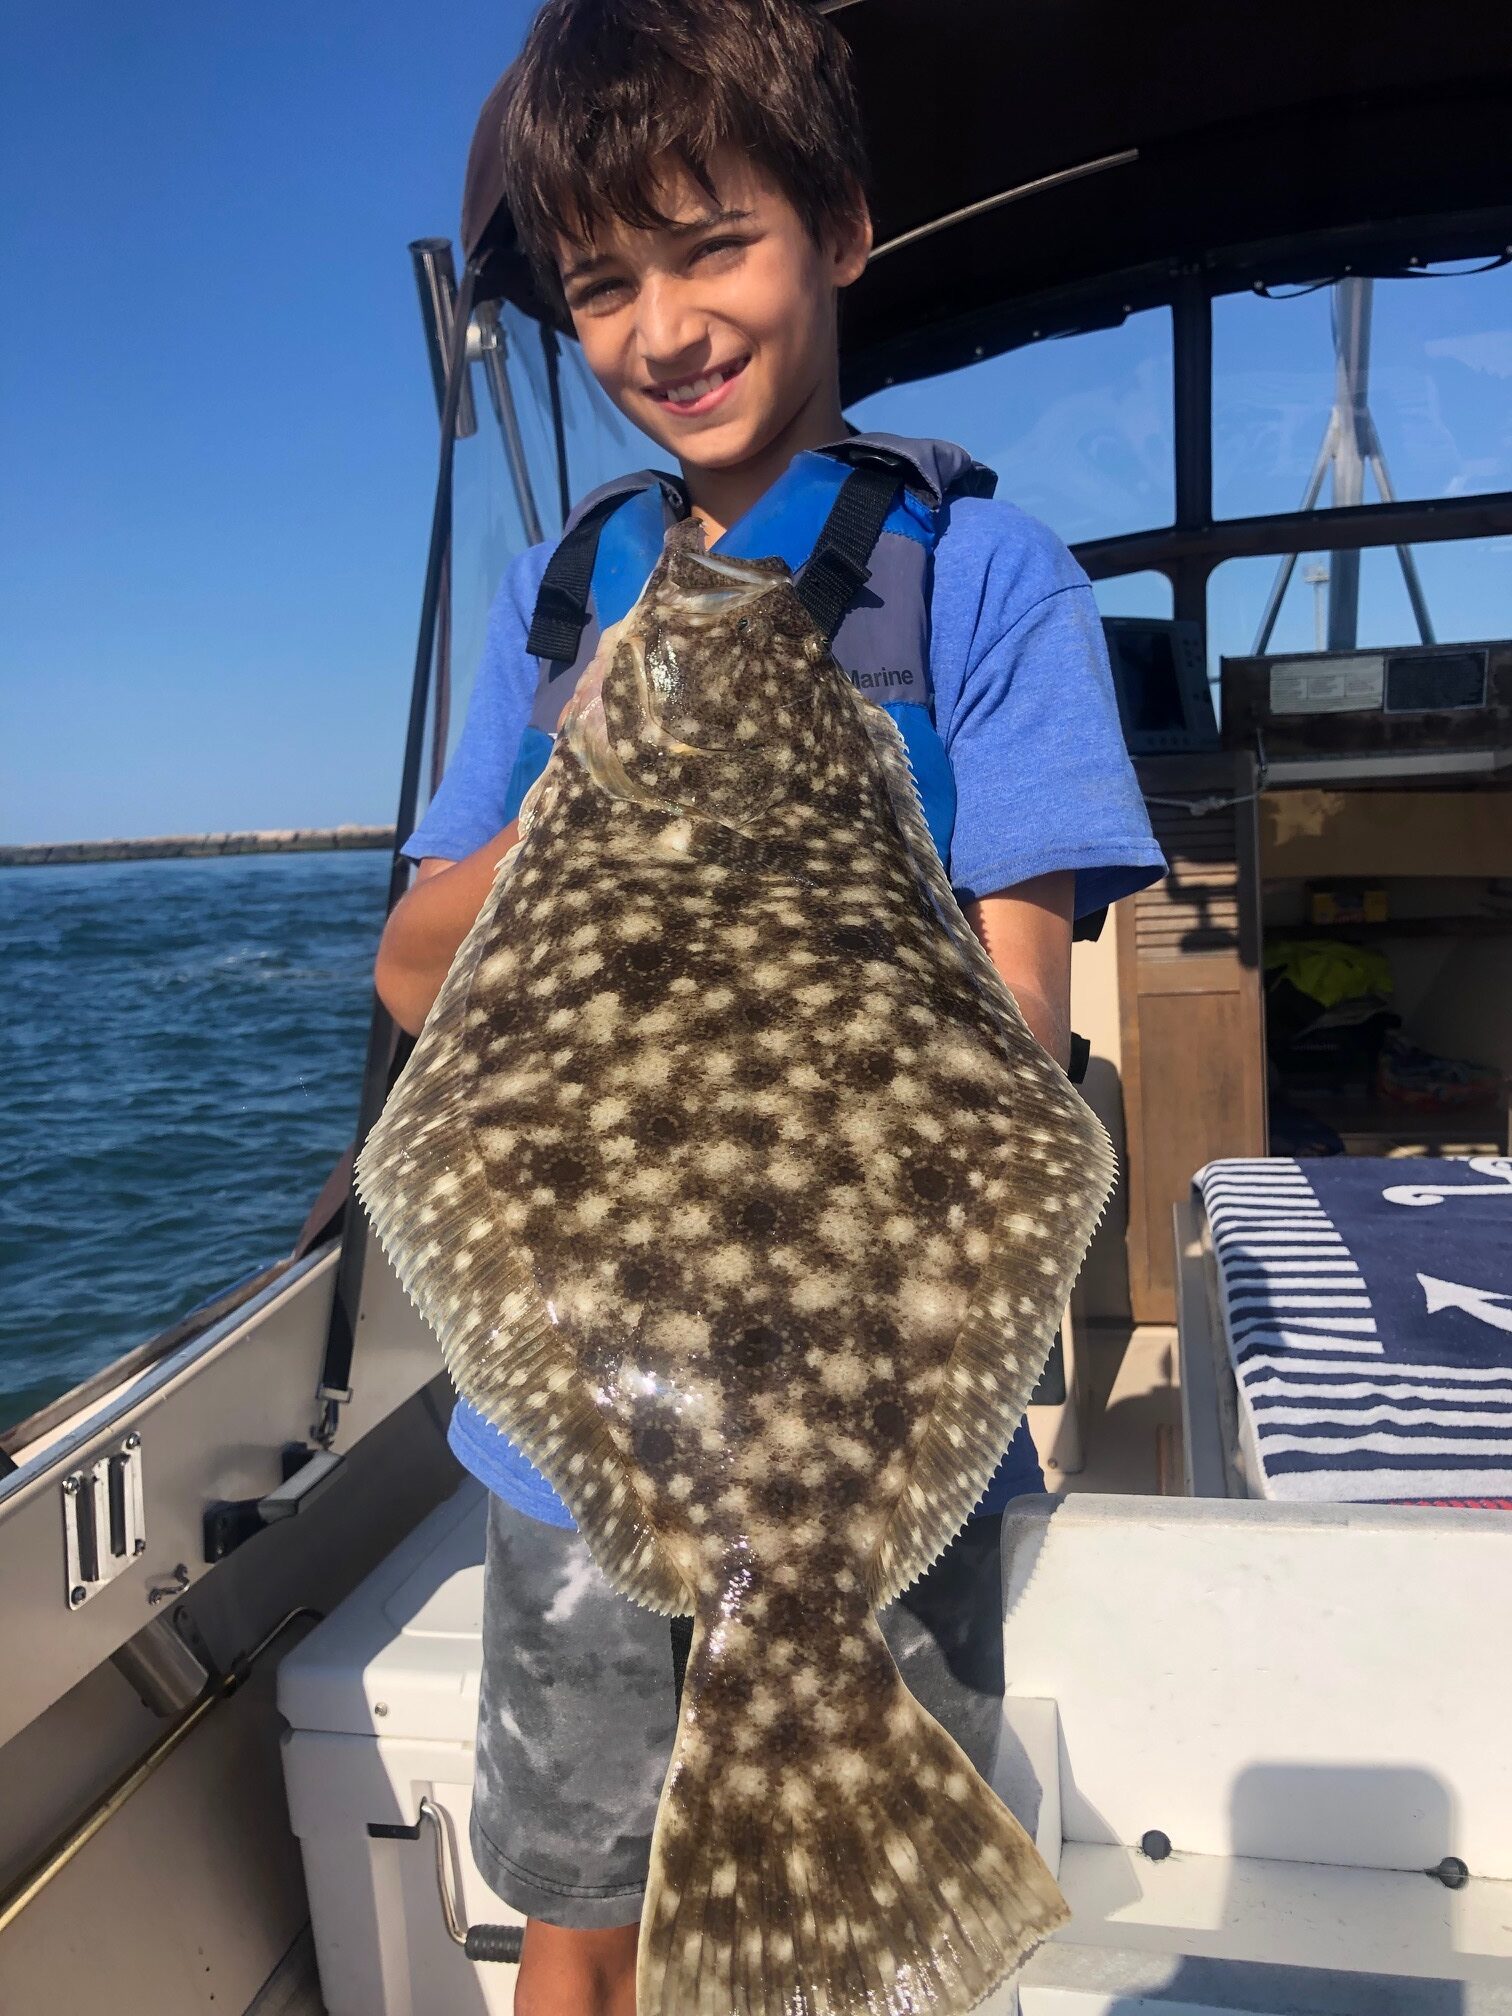 Julian Jain with a beautifully camouflaged fluke caught in Shinnecock Bay last week while fishing with Capt. Brad Ries aboard Someday Came Charters.